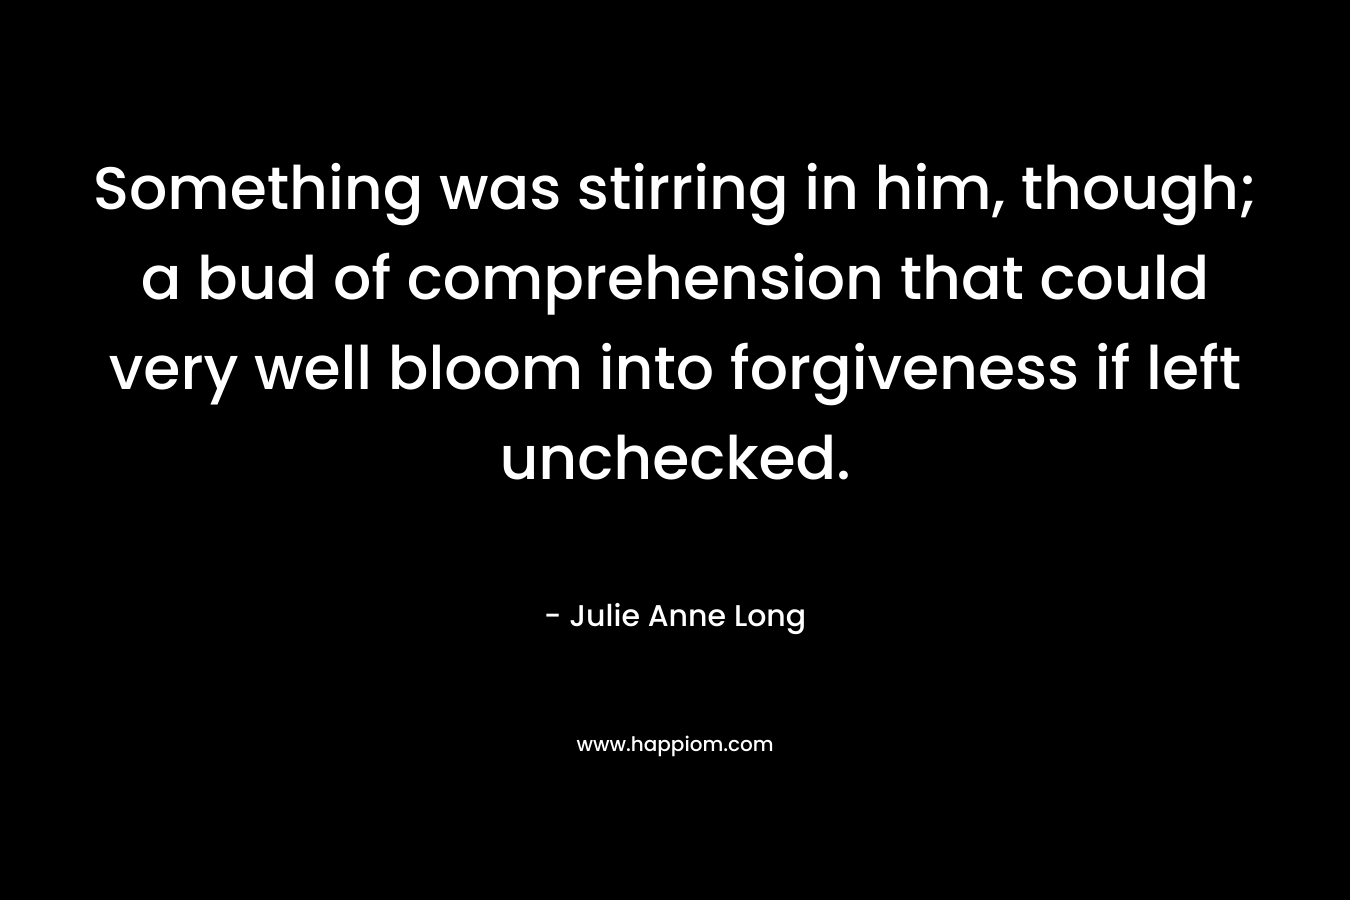 Something was stirring in him, though; a bud of comprehension that could very well bloom into forgiveness if left unchecked. – Julie Anne Long